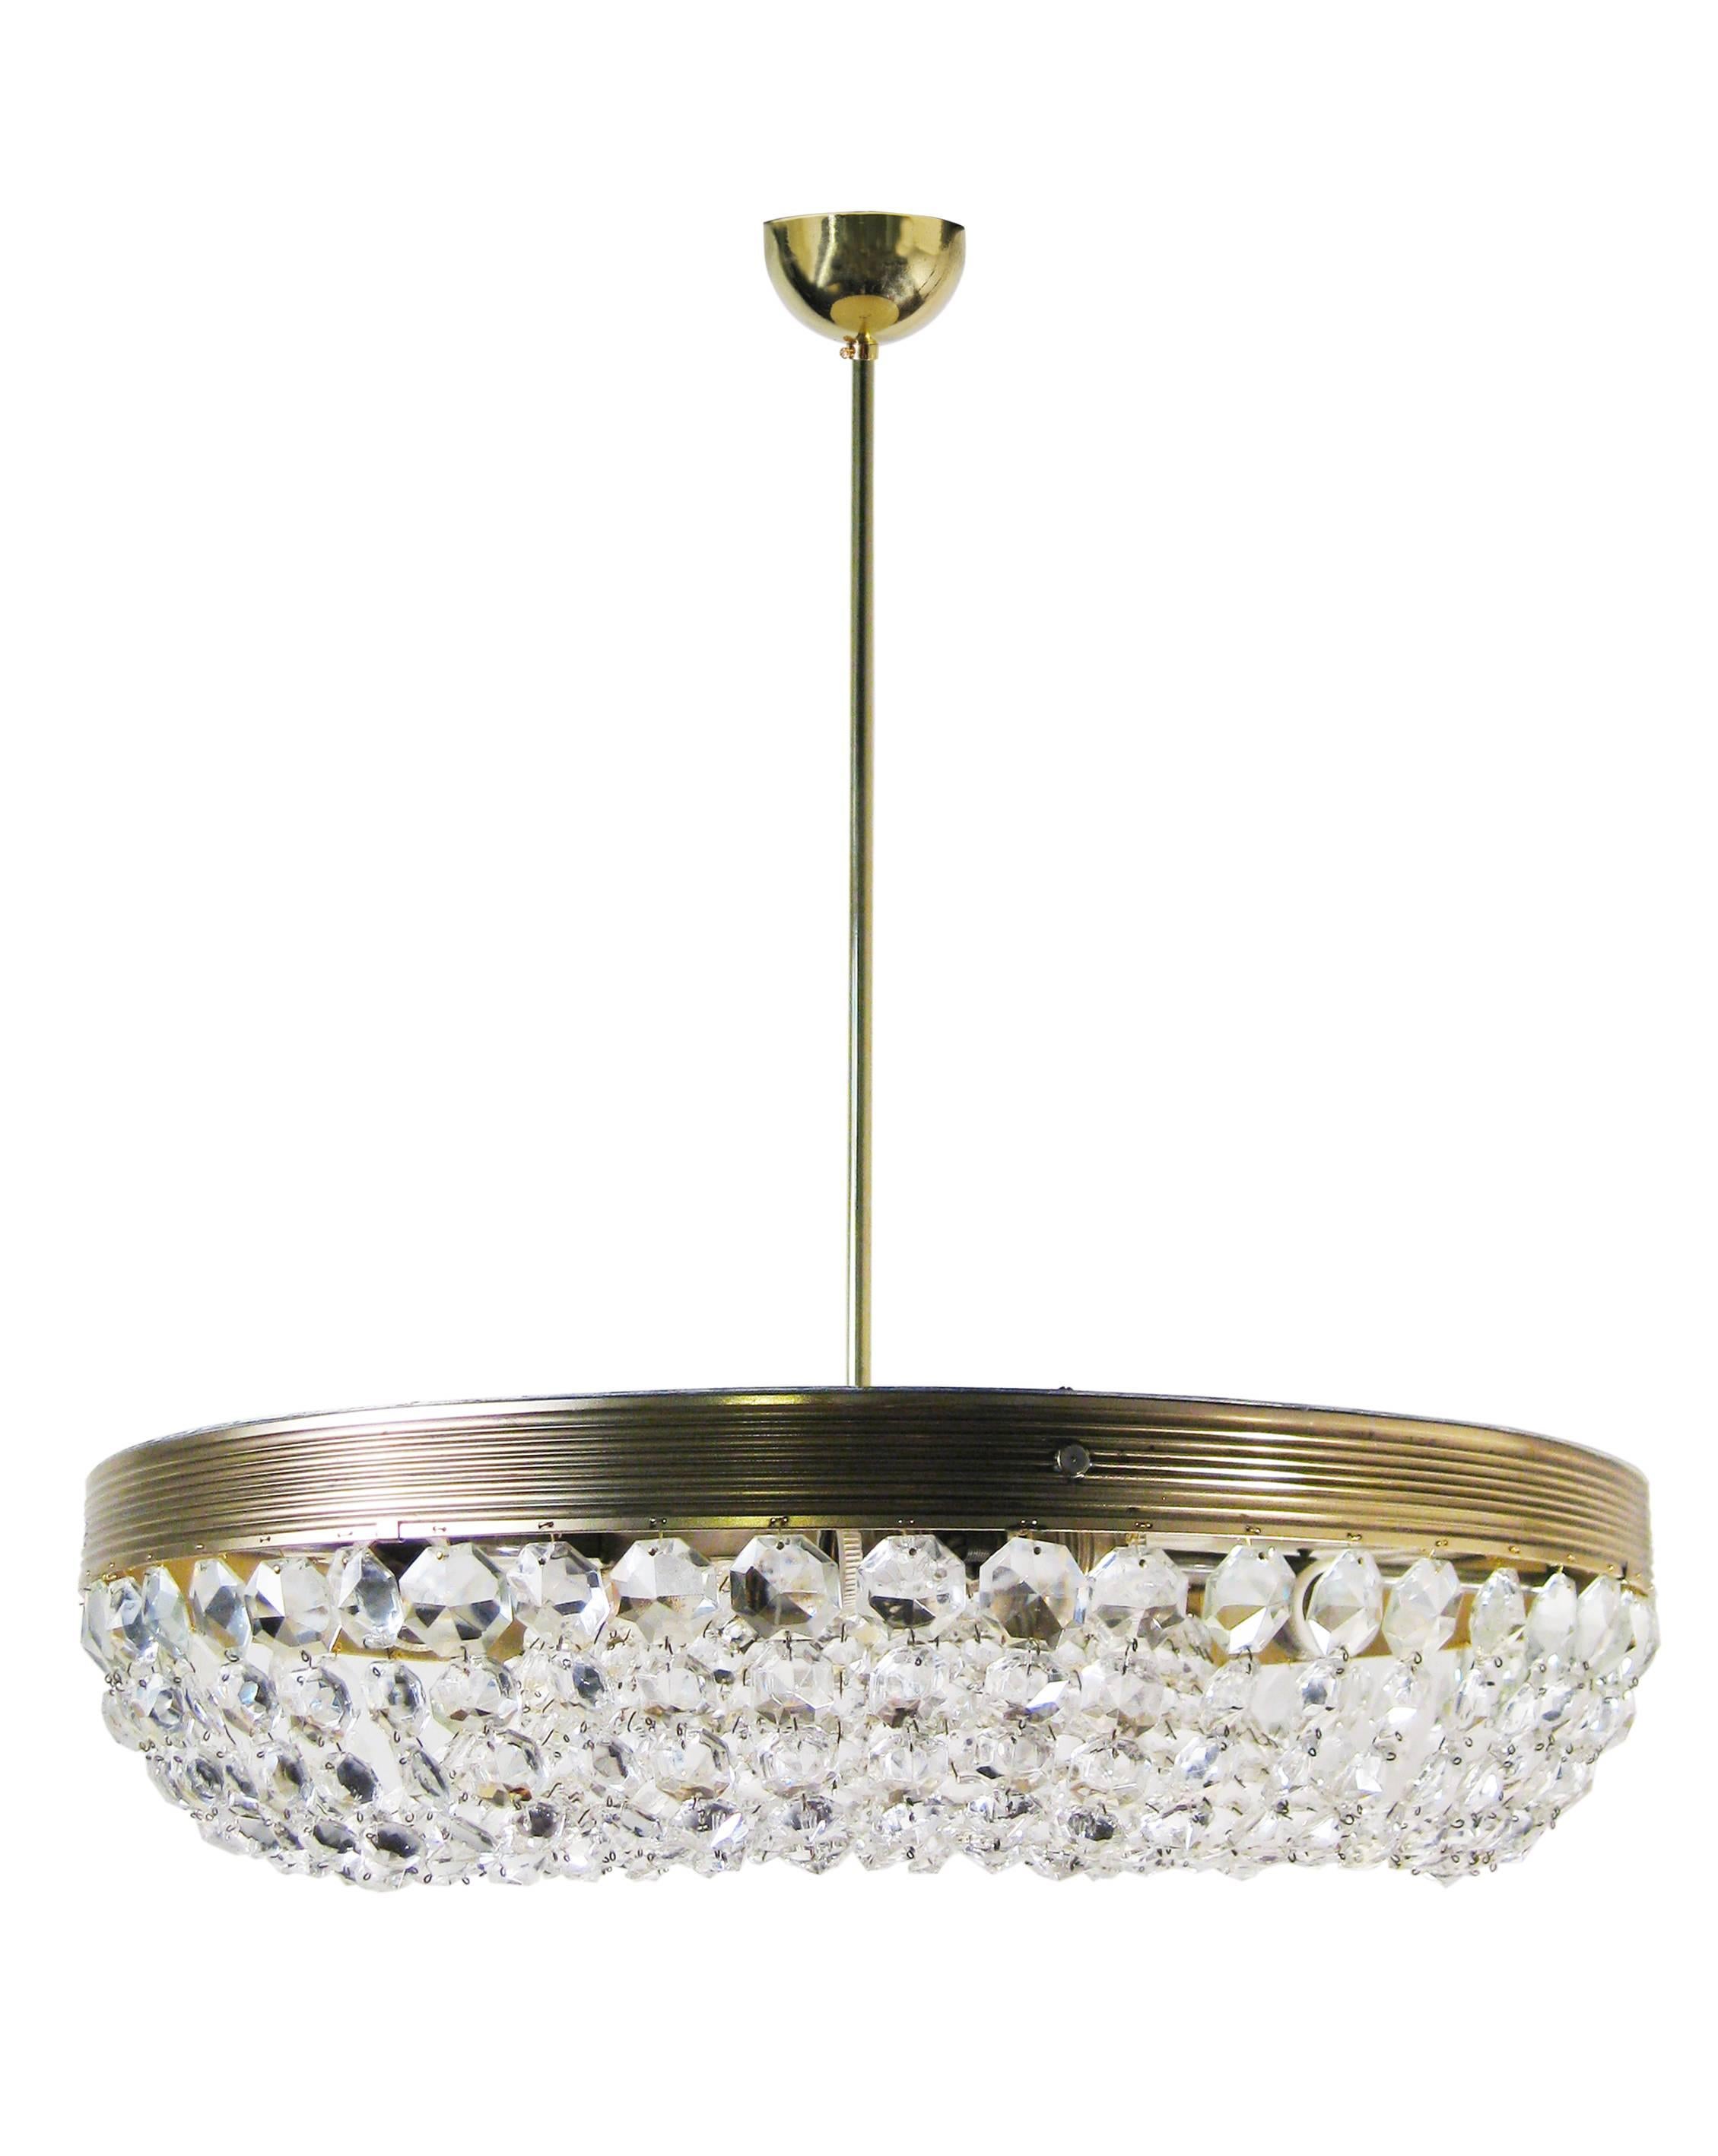 This lovely light is a more contemporary version of Bakalowits & Sohne's original and extremely successful, "basket" model. Its striated brass frame is ornamented with diamond-shaped crystals, hung in graduated loops in the company's